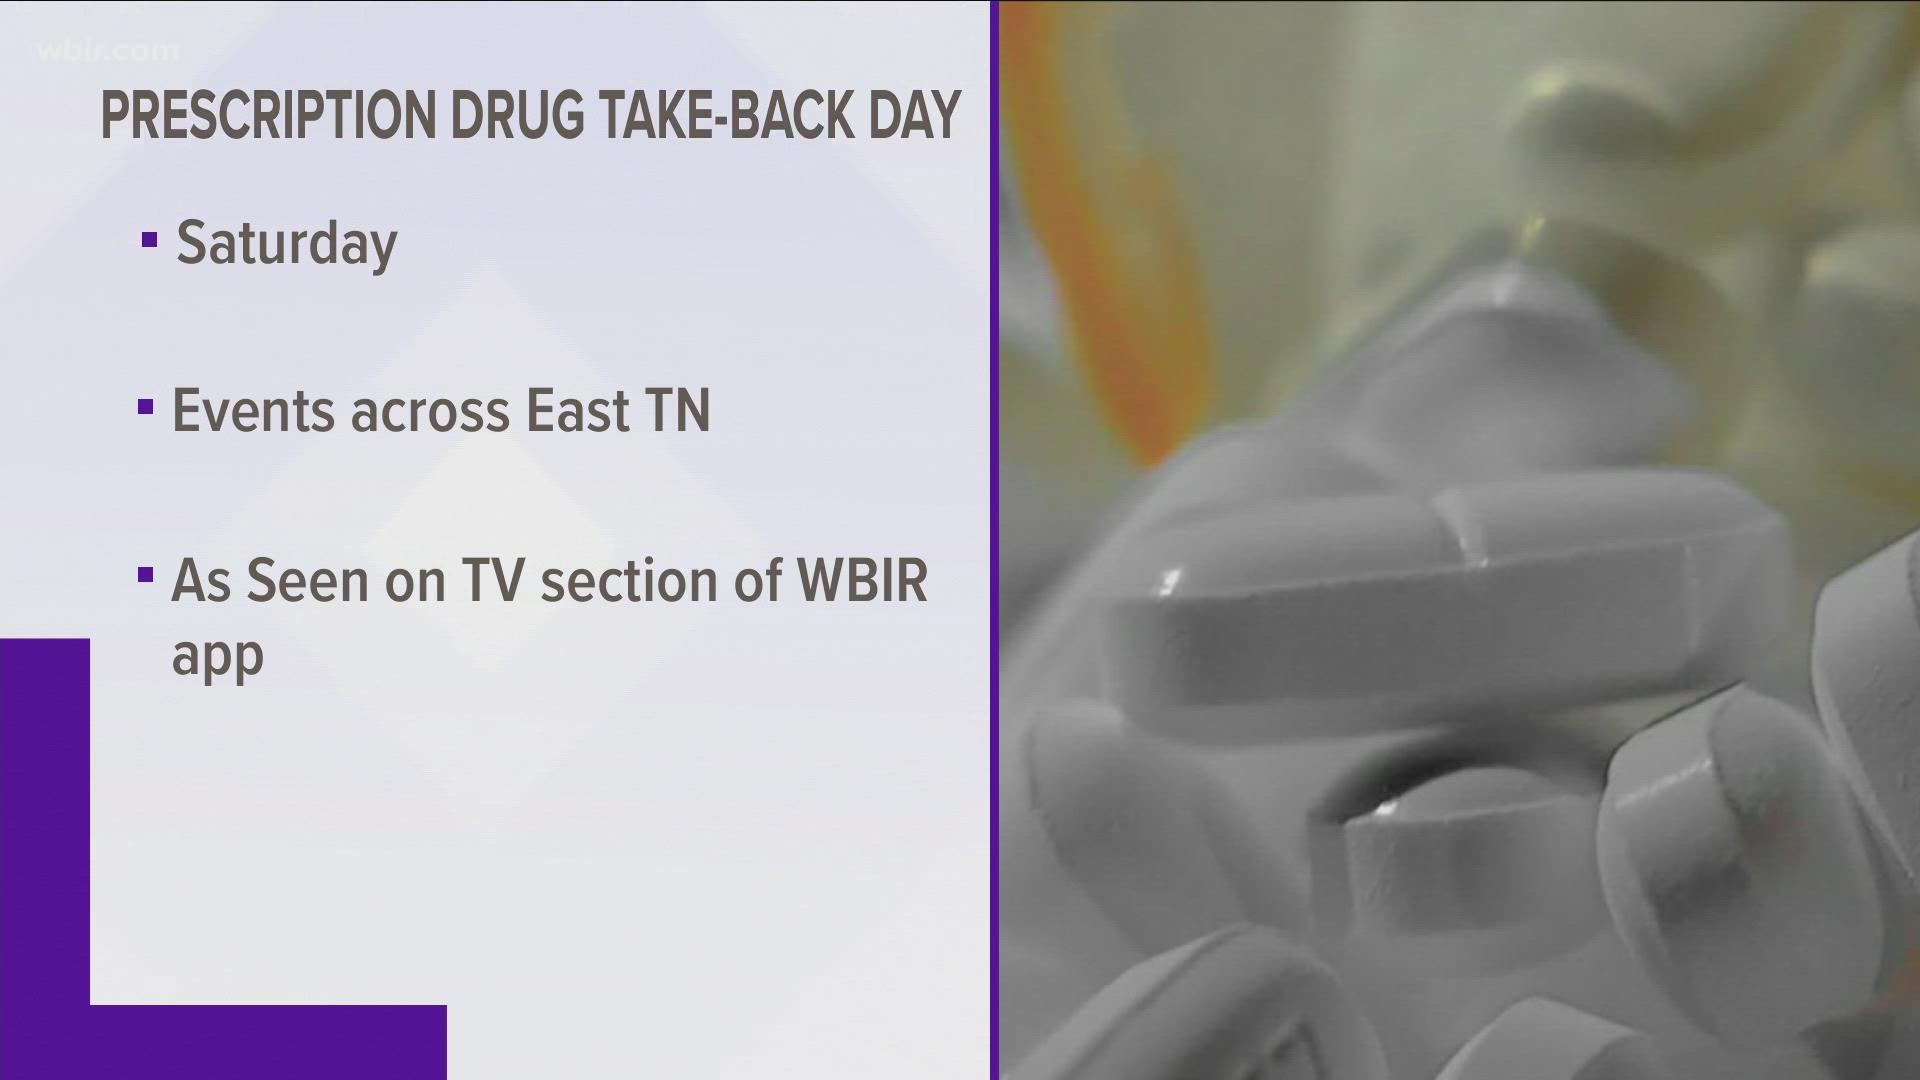 Law enforcement, pharmacies and community groups across East Tennessee are hosting events to collect unwanted medications.